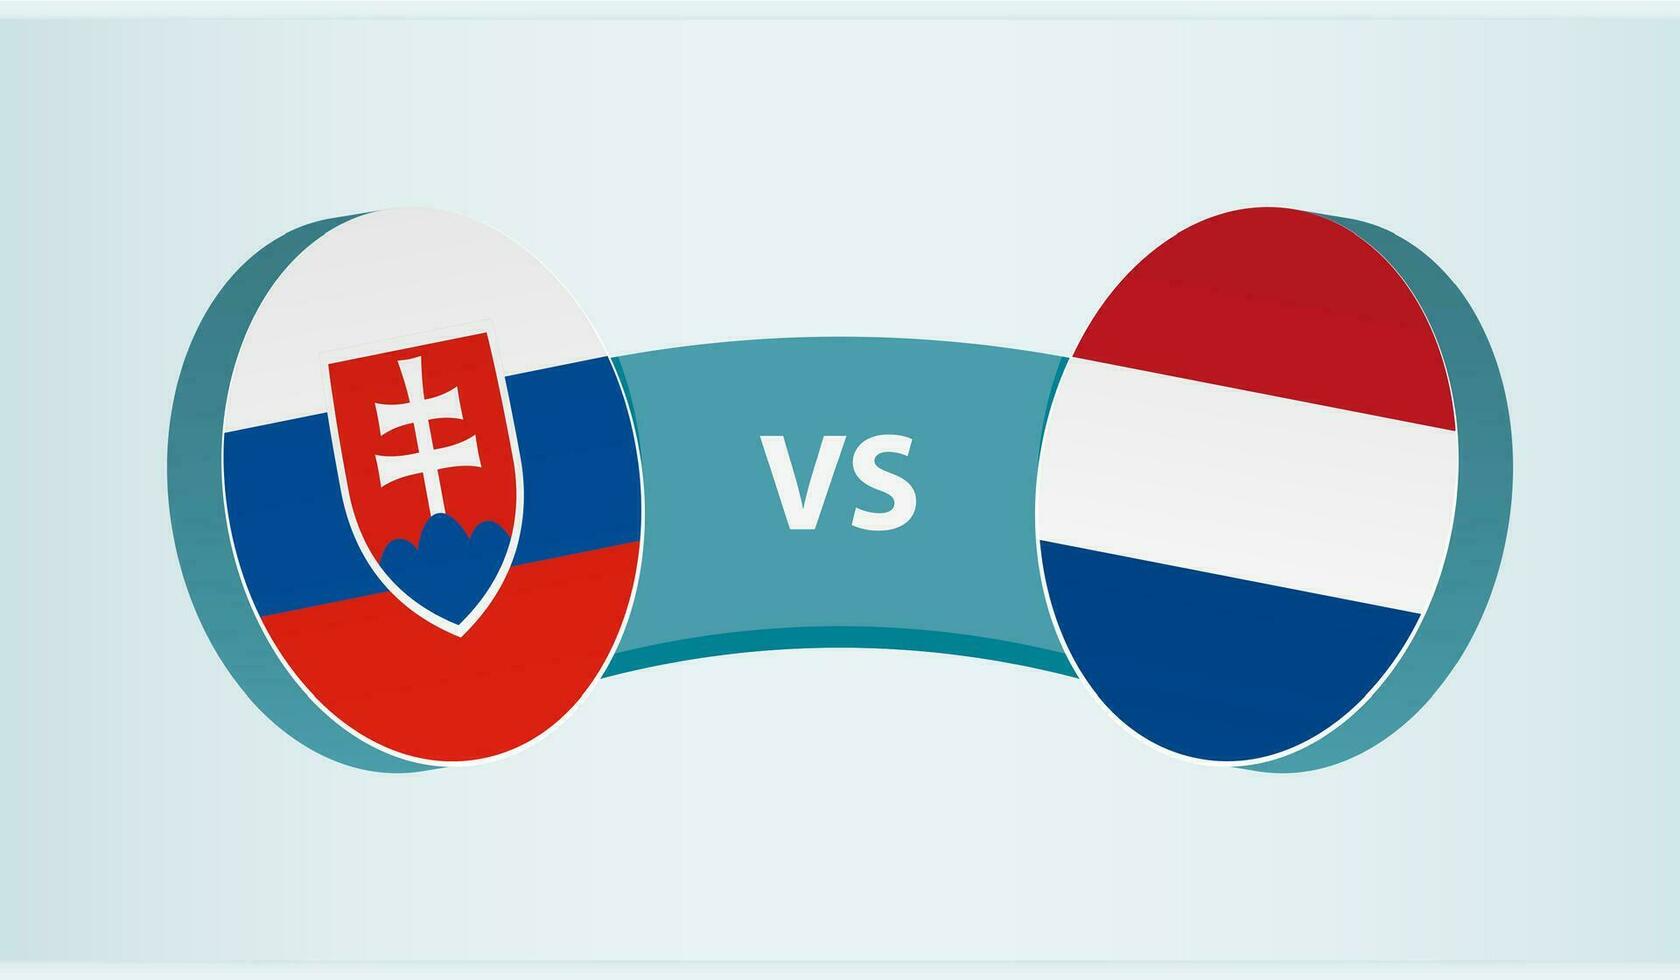 Slovakia versus Netherlands, team sports competition concept. vector